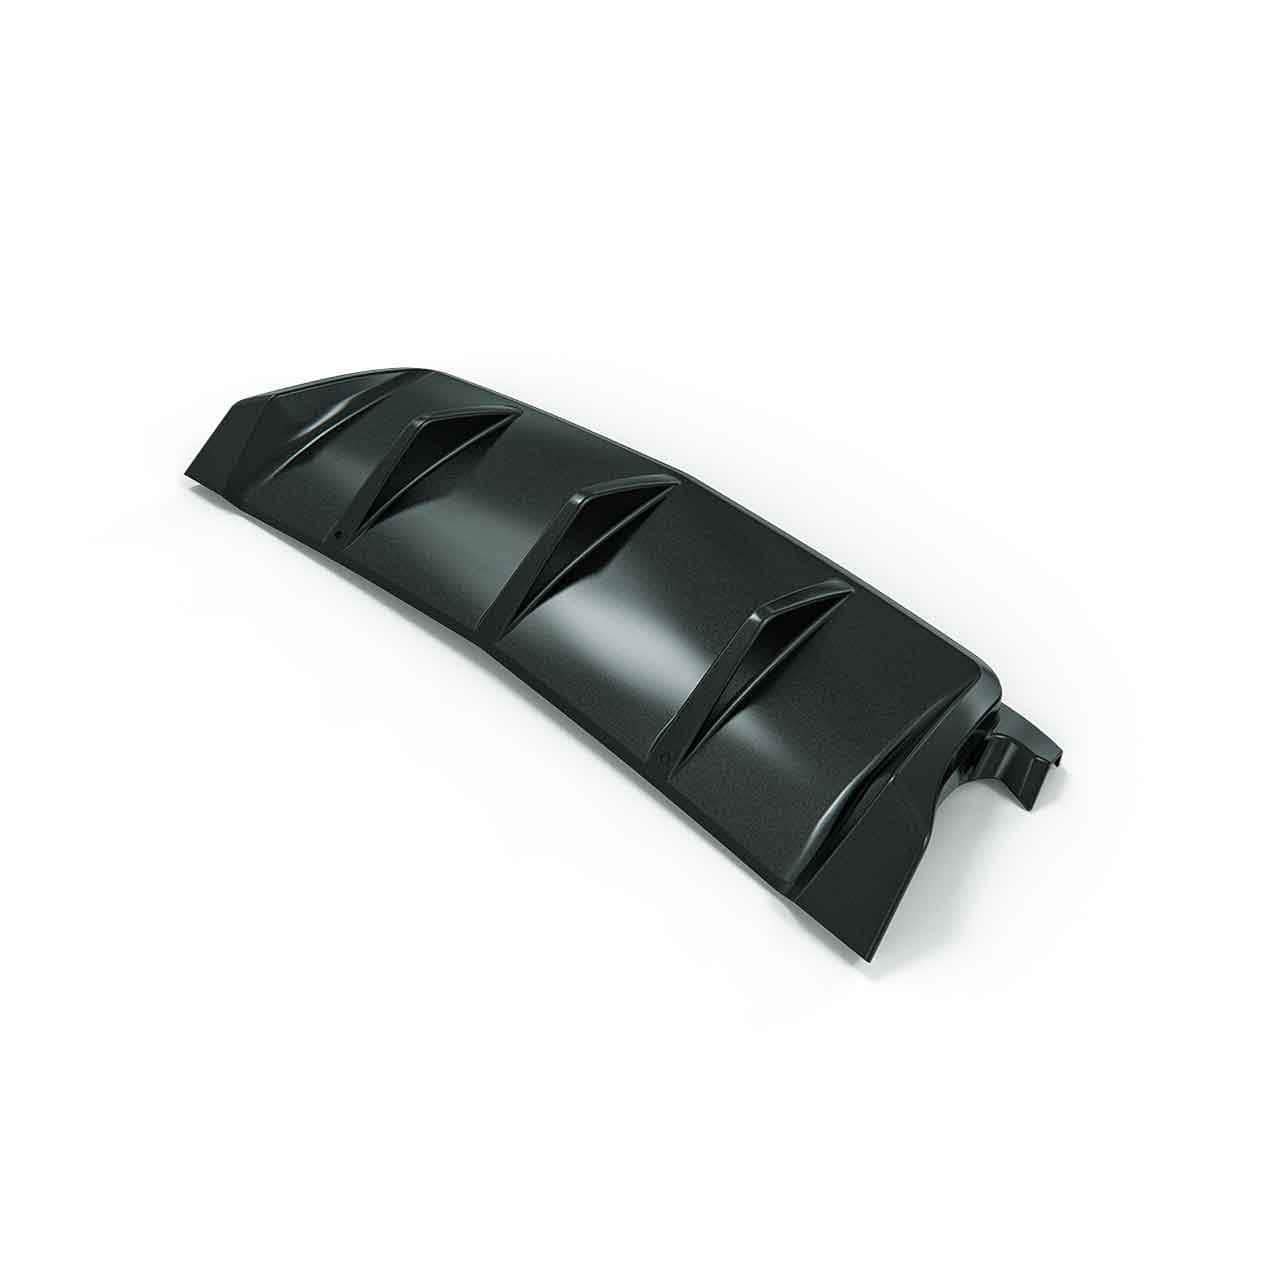 ACS Composite Gen6 Camaro Rear Diffuser in Gloss Black [48-4-045]GB8 - Improves aerodynamics and complements quad exhaust systems. Easy installation instructions included.